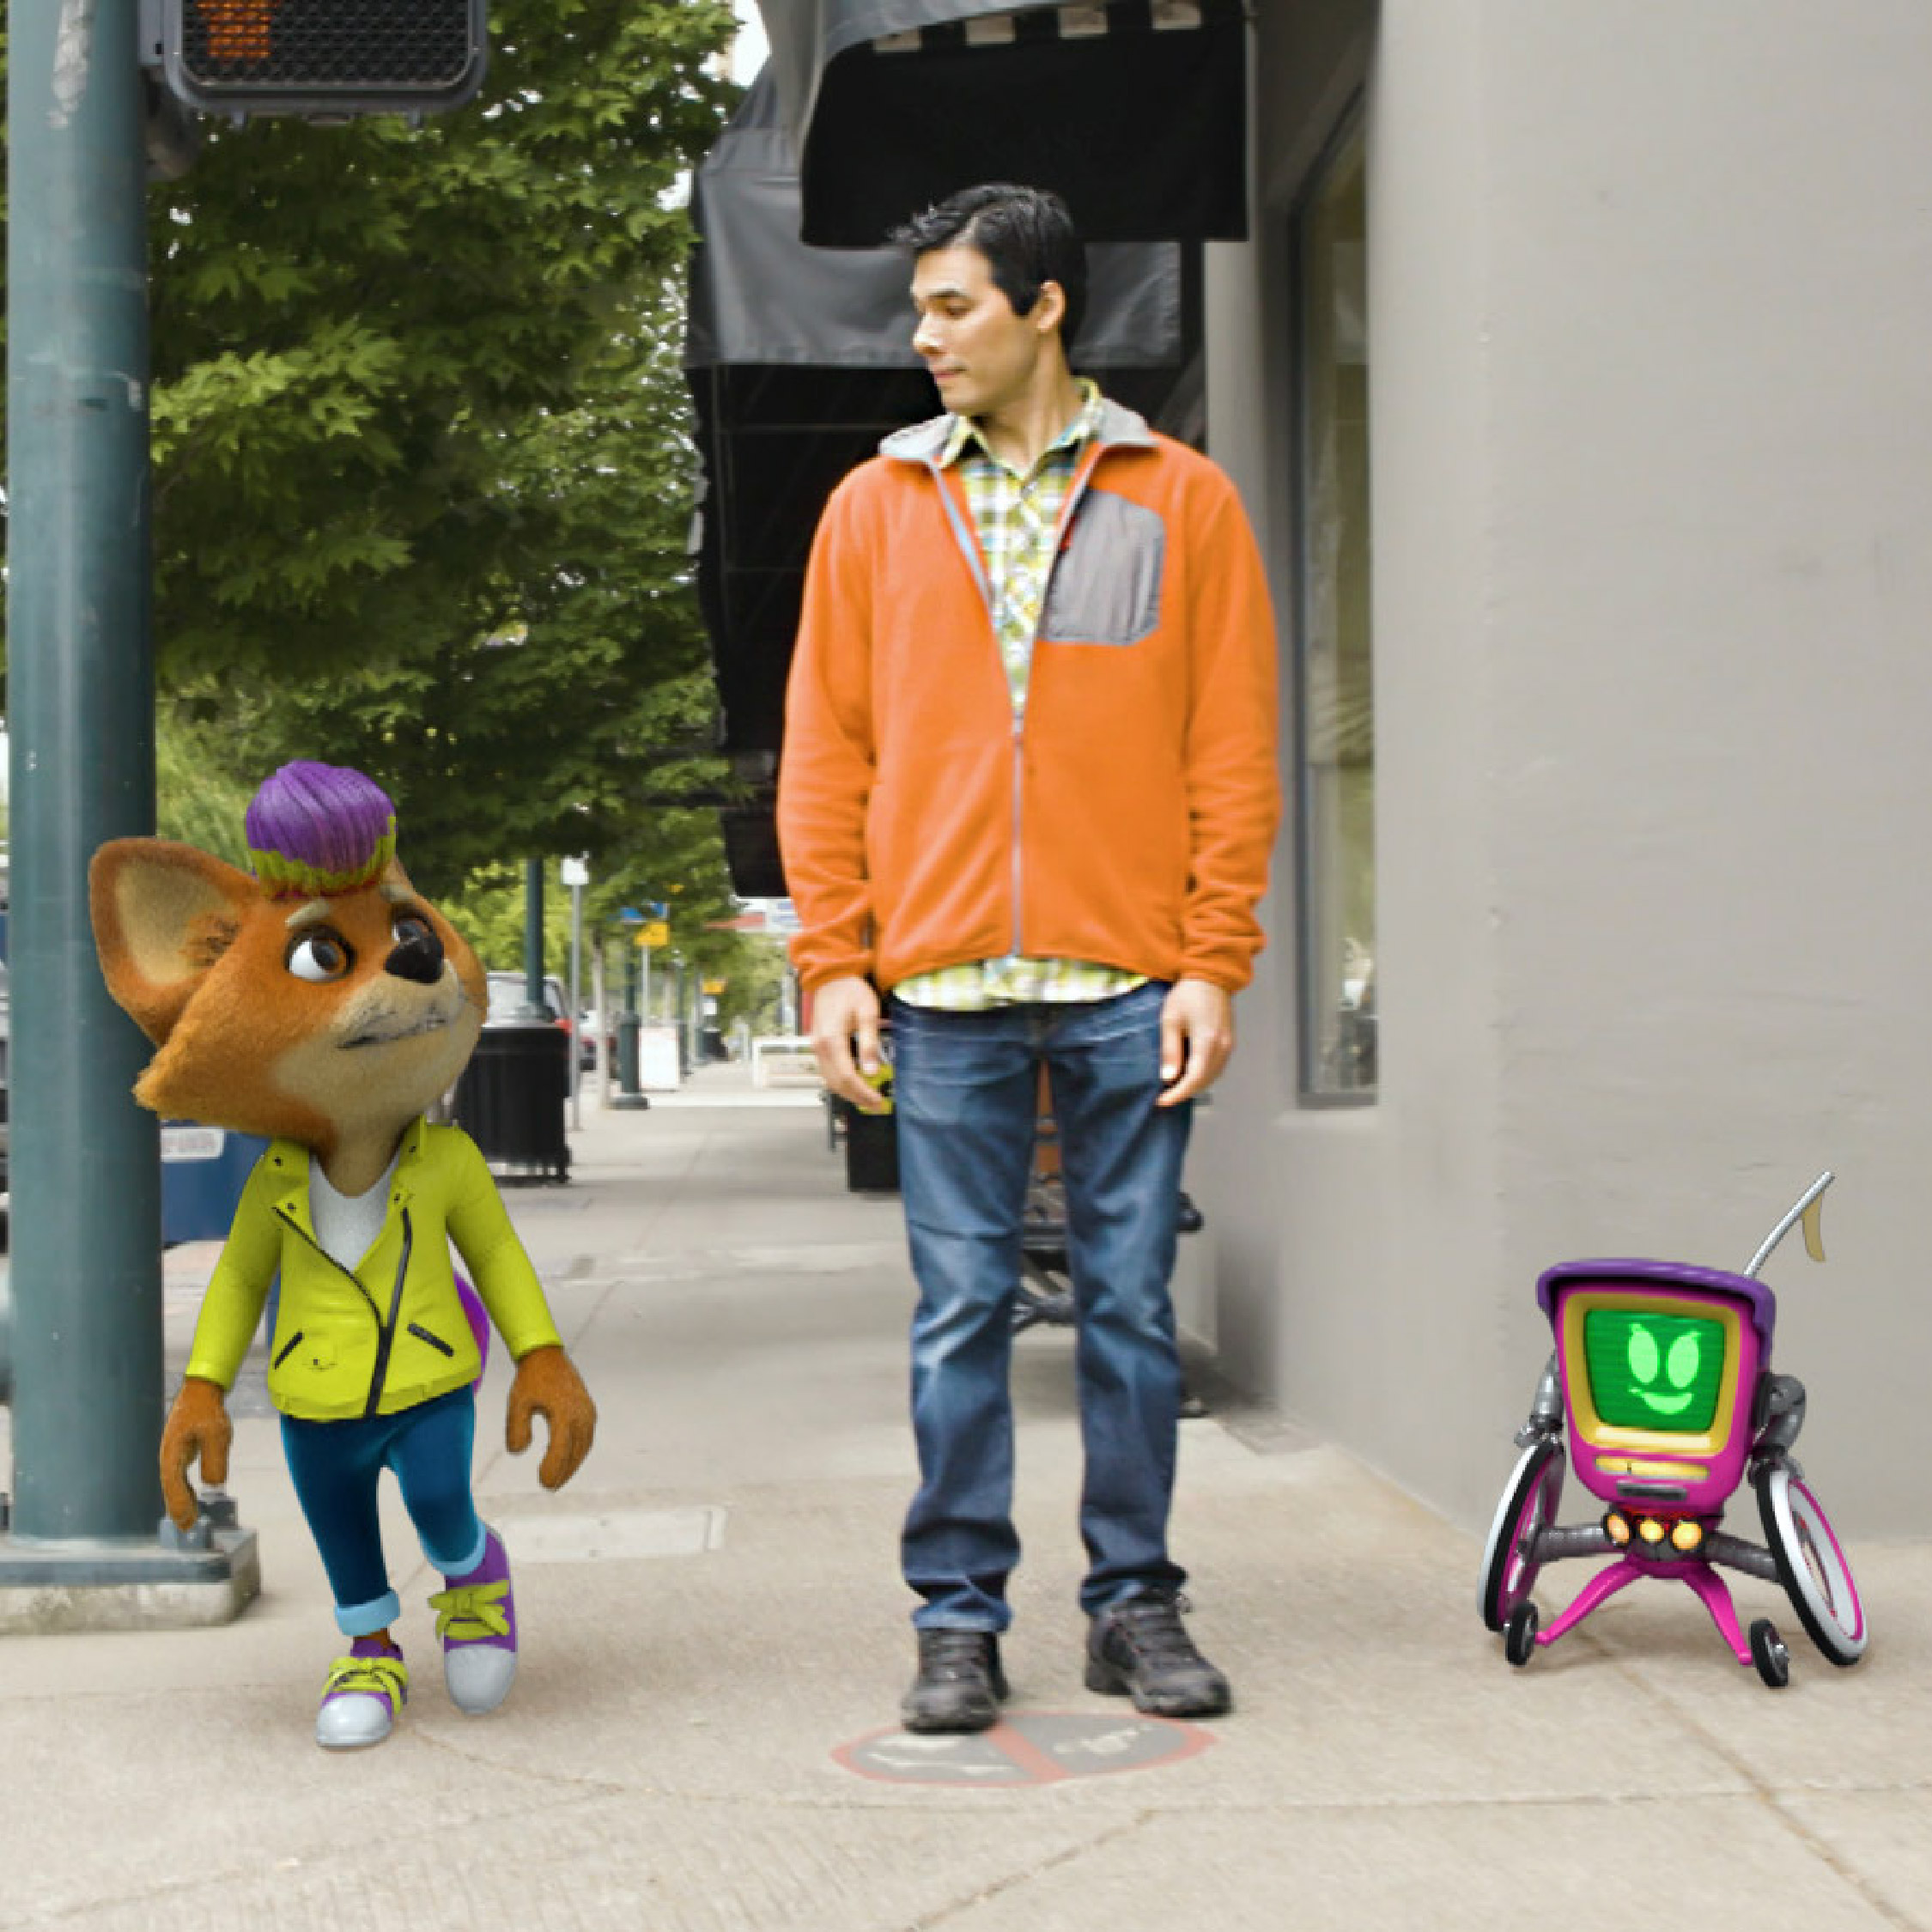 ODOT Pedestrian Safety commercial